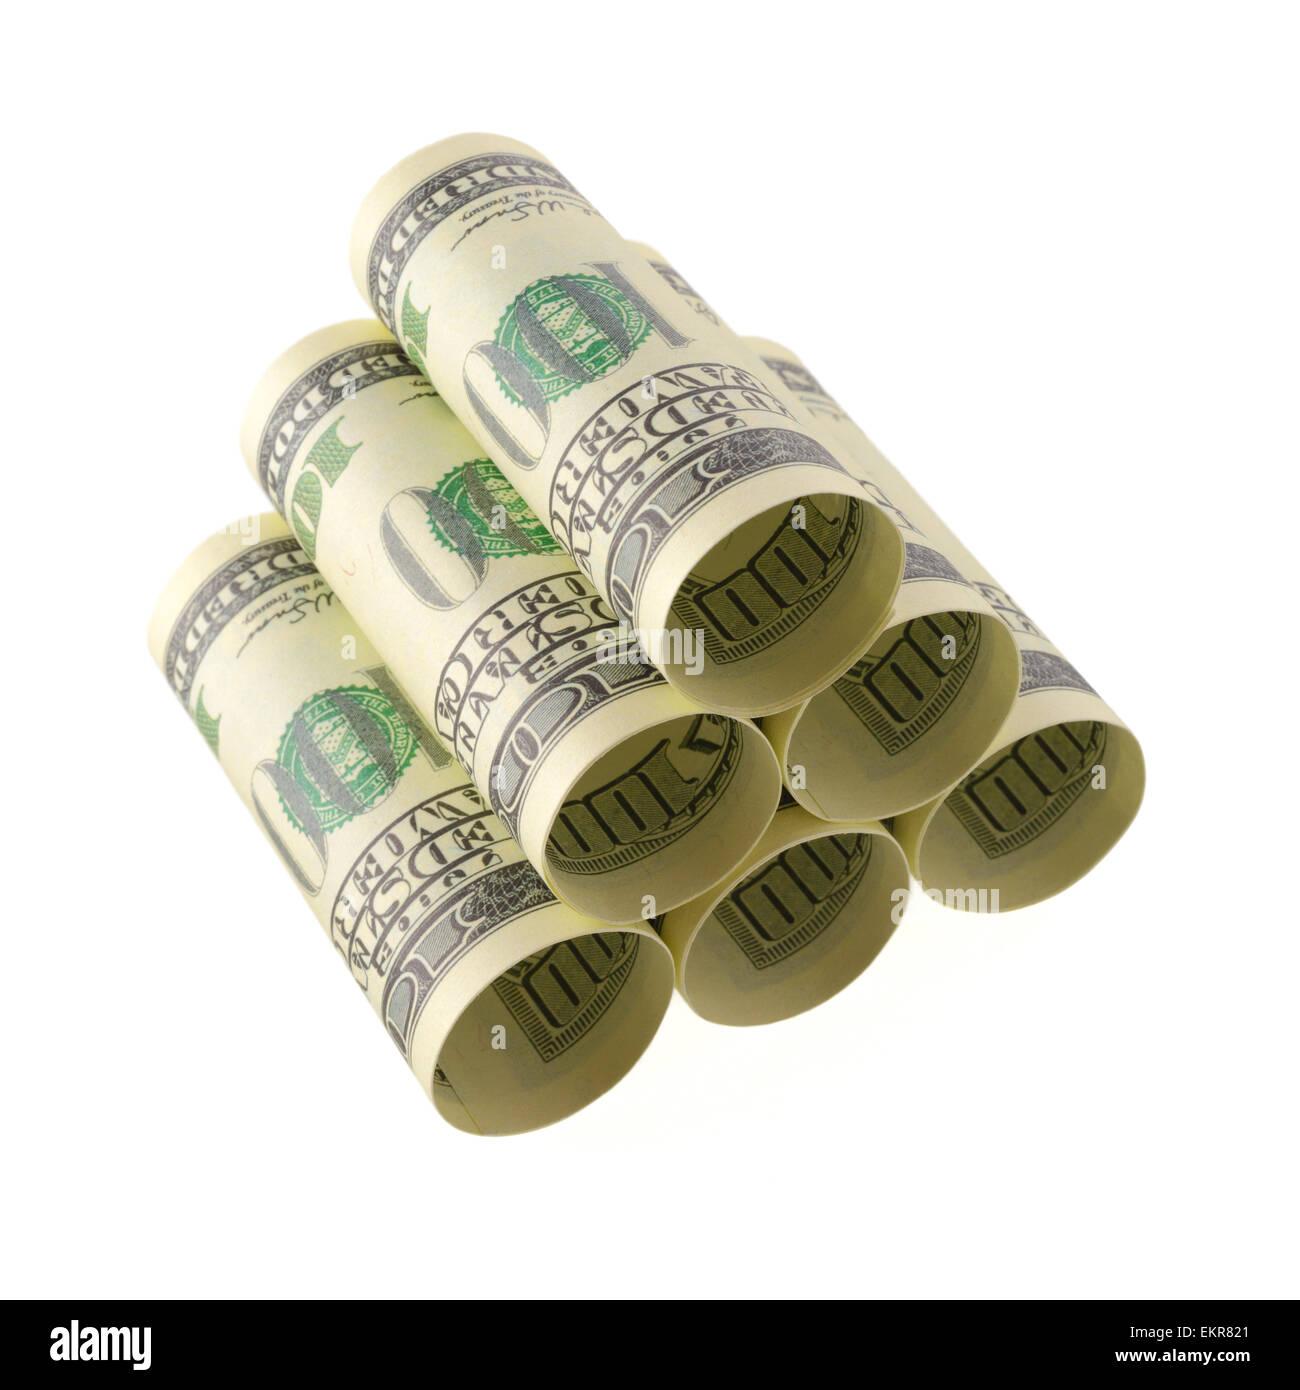 Isolated objects: financial concept, one-hundred dollar bills, rolled as tubes and piled, isolated on white background. Stock Photo